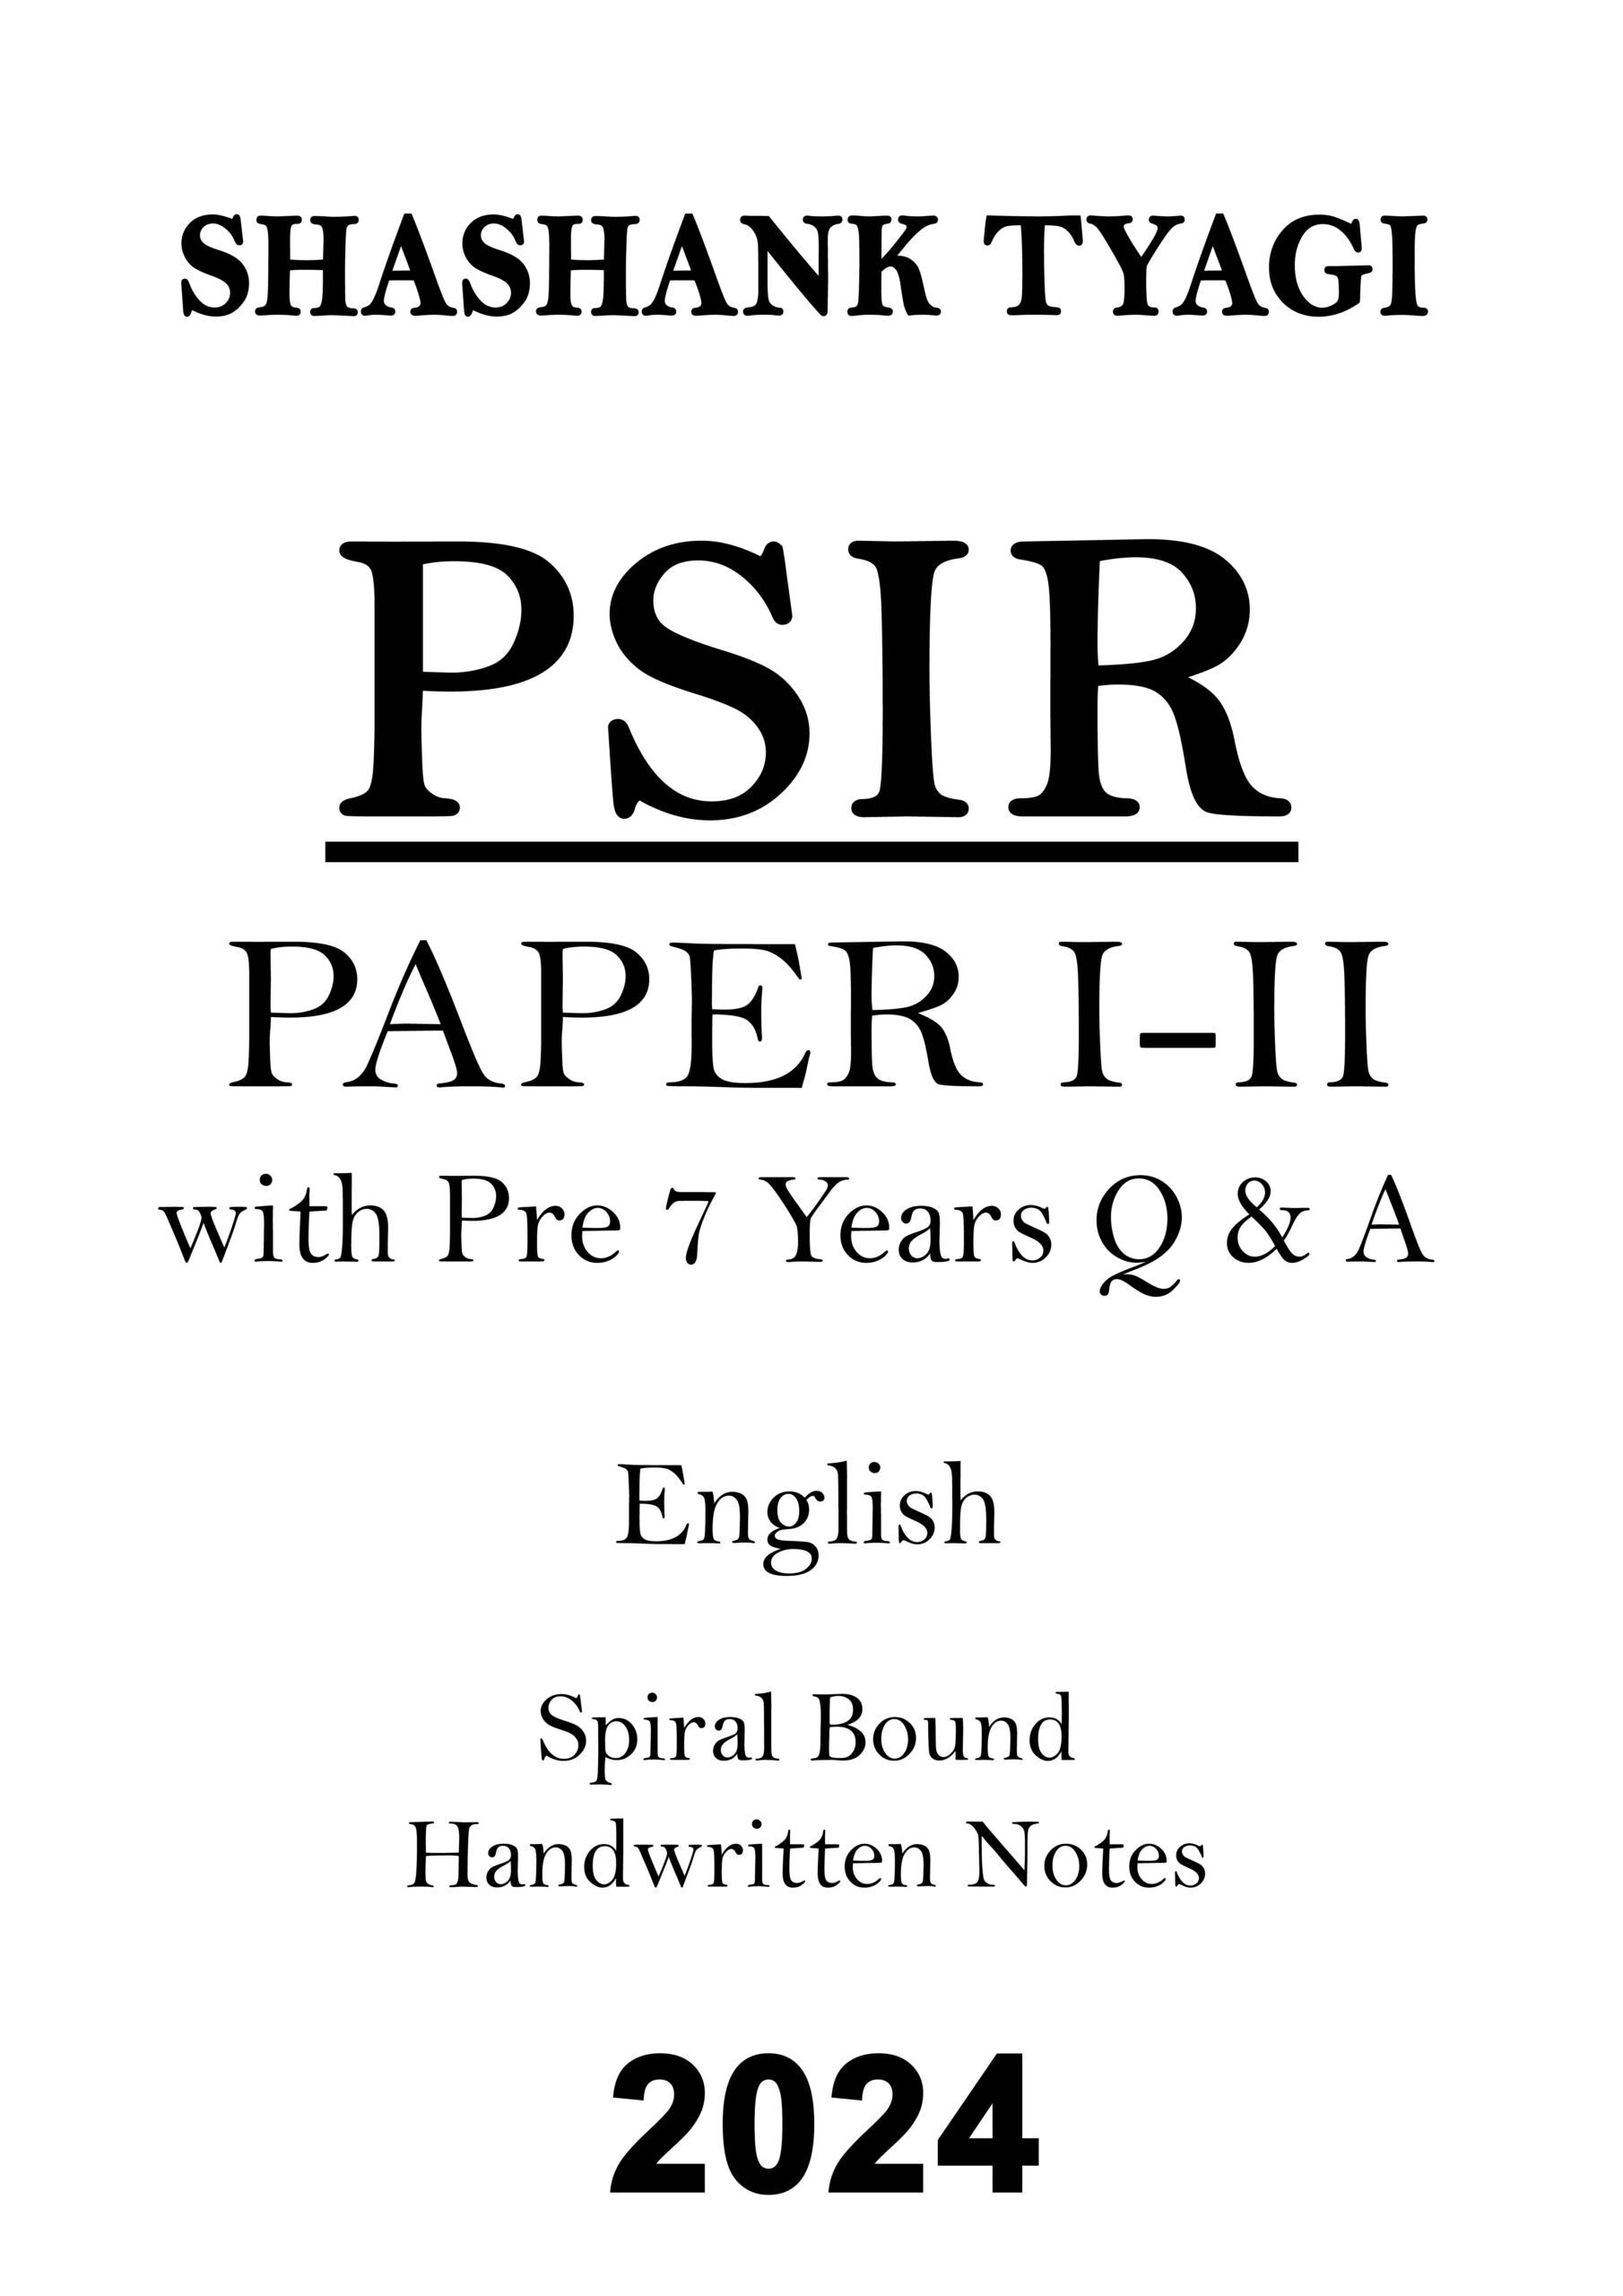 previous-7-years-q-&-a-plus-complete-psir-class-notes-by-shashank-tyagi